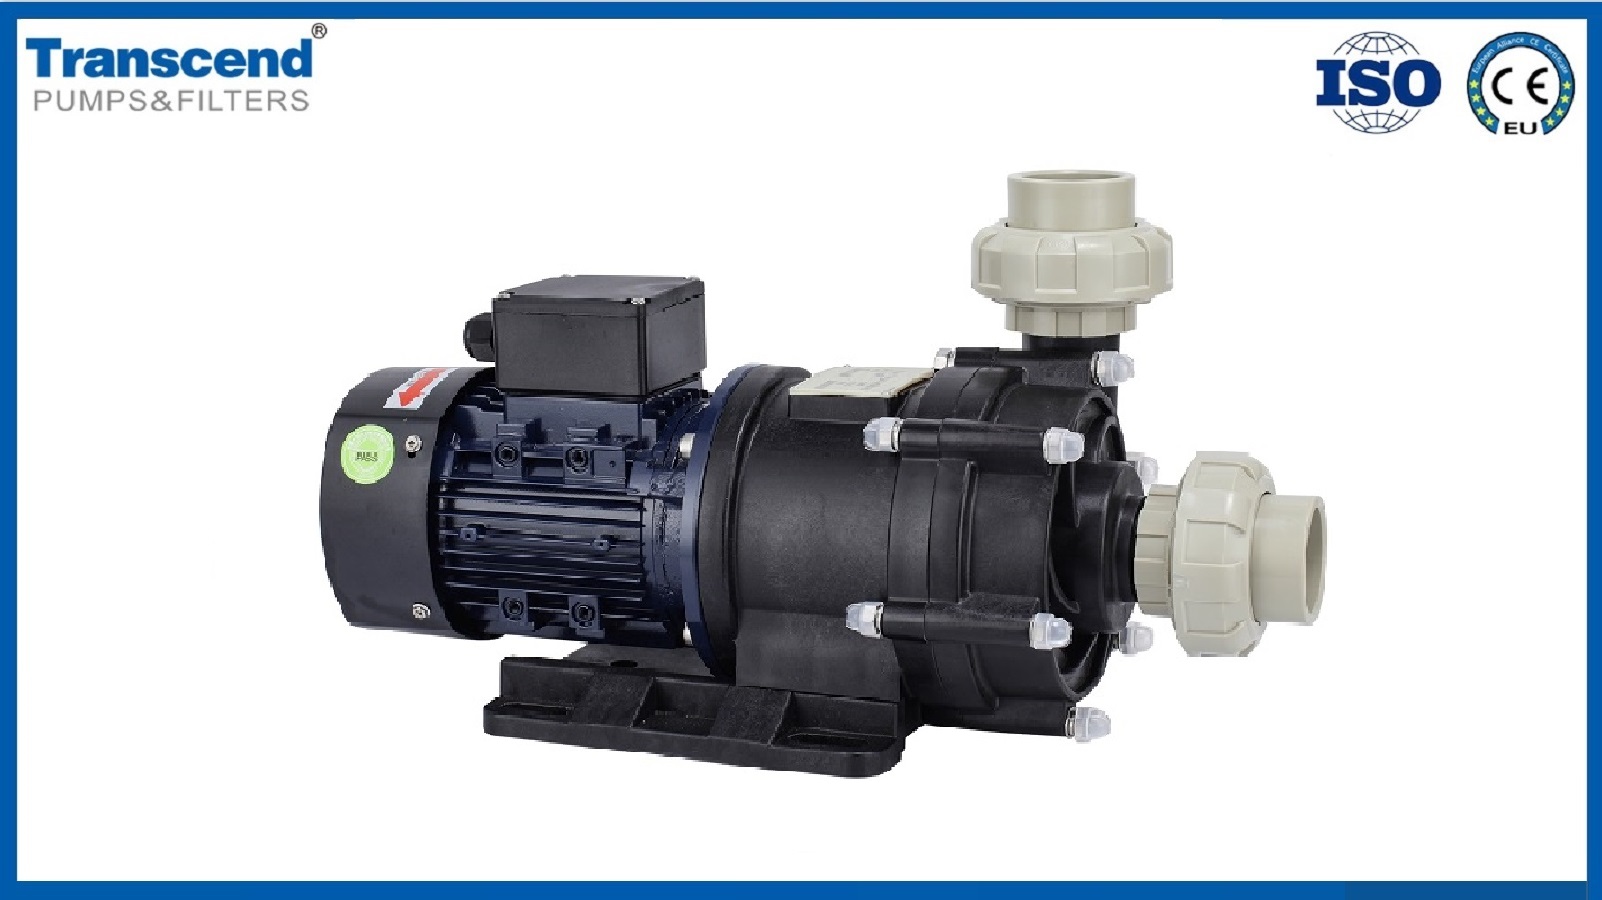  Customized magnetic pump manufacturers From China | Transcend 